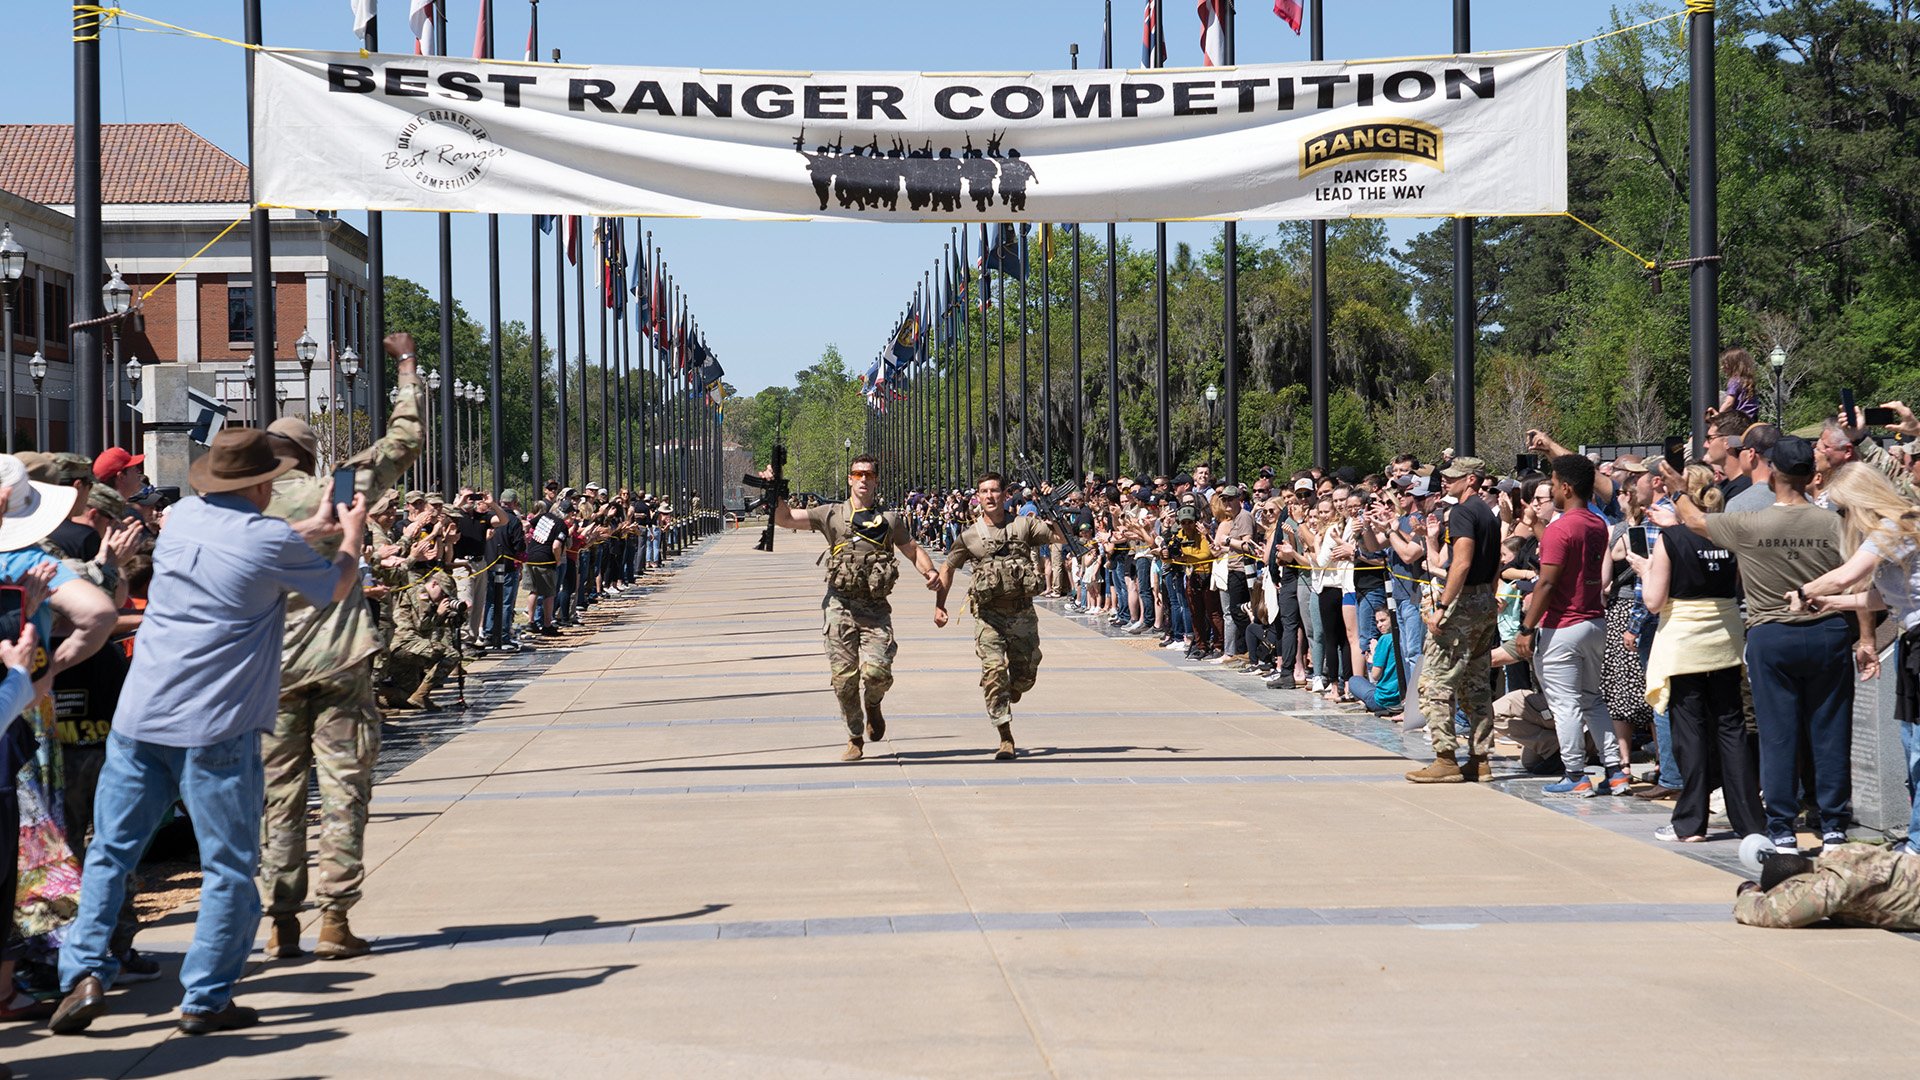 Tymothy Boyle and Joshua Corson, both captains in the 75th Ranger Regiment, cross the finish line of the final event. The pair beat 50 other teams from across the Army to win the annual three-day competition. Photo by Noelle Wiehe/Coffee or Die Magazine.